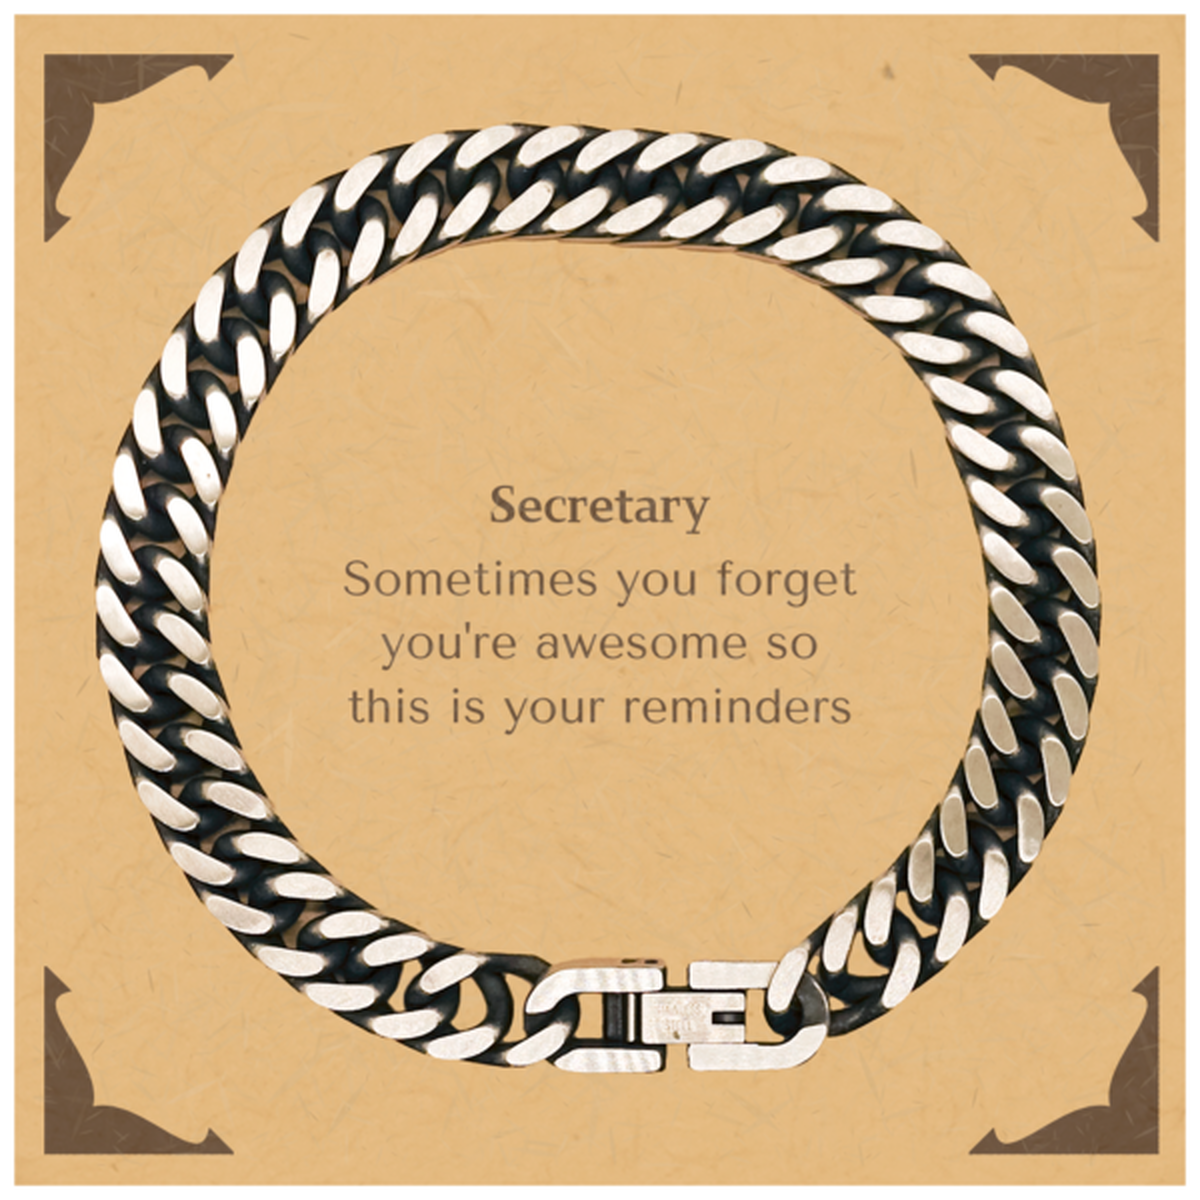 Sentimental Secretary Cuban Link Chain Bracelet, Secretary Sometimes you forget you're awesome so this is your reminders, Graduation Christmas Birthday Gifts for Secretary, Men, Women, Coworkers